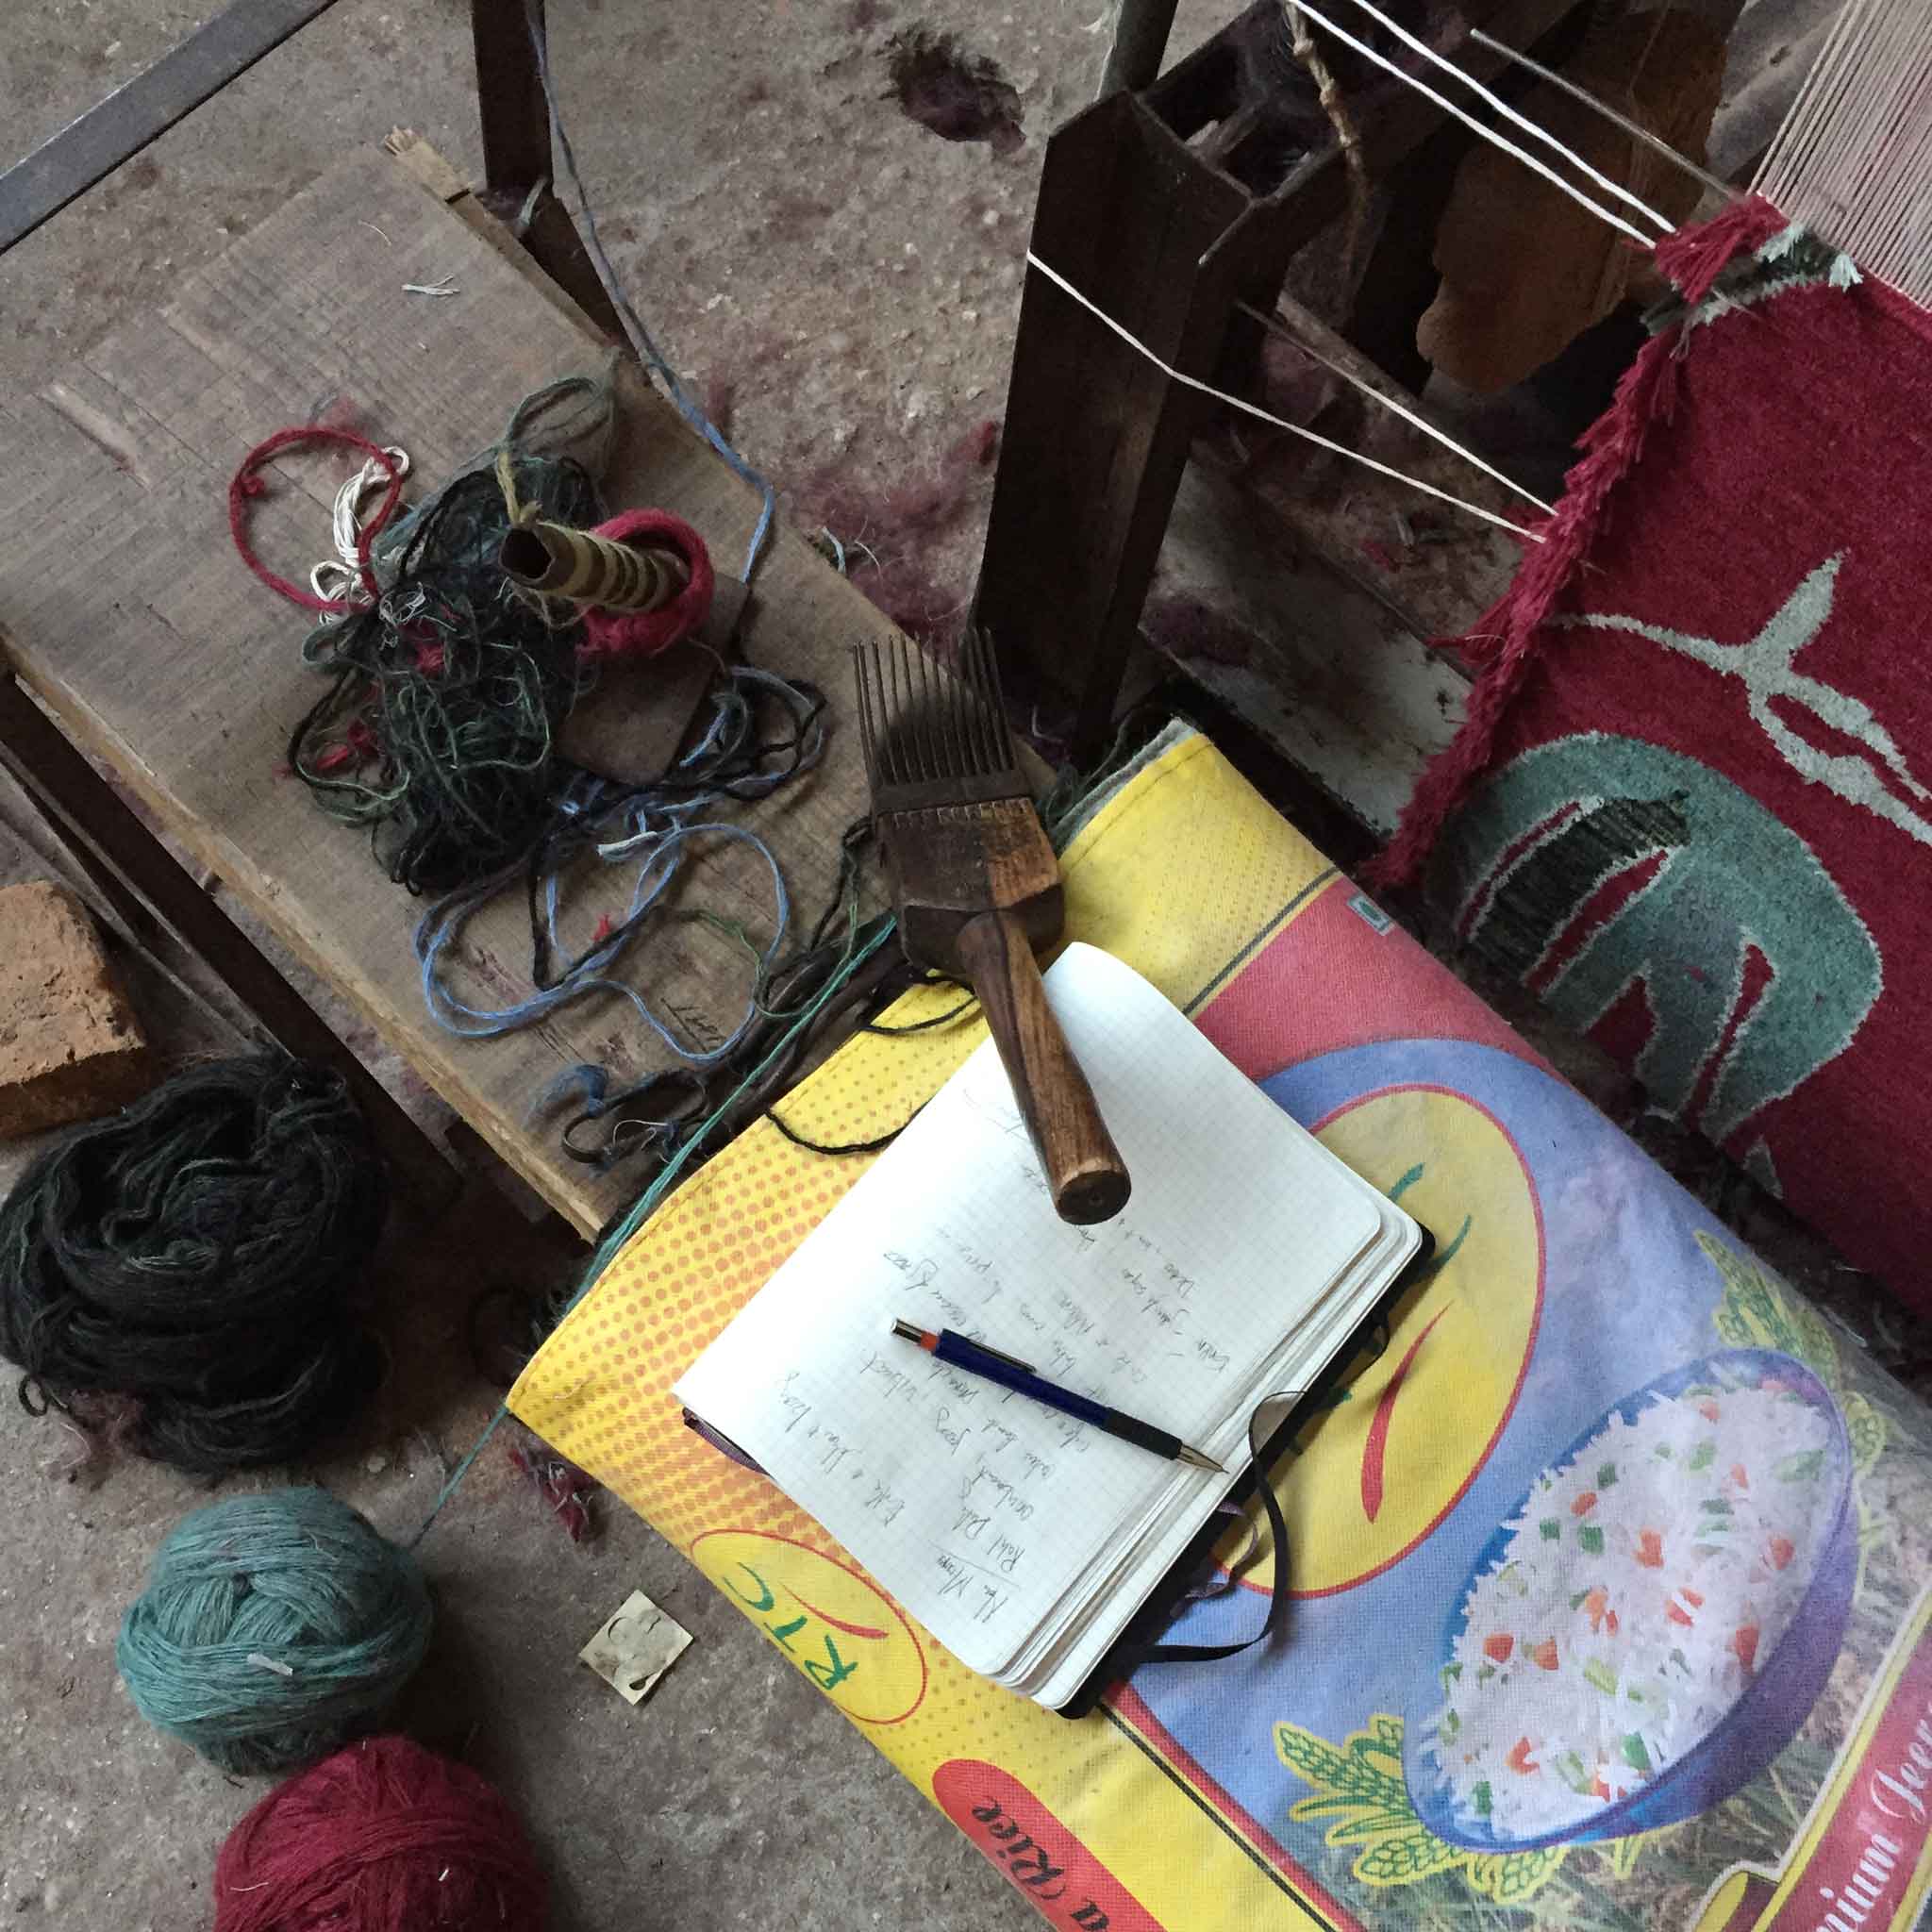 An impromptu and non-staged still life in which writer meets weaver. 'Camara' in colour 'Oxblood' by New Moon is visible on loom at the right. | Image courtesy of The Ruggist.